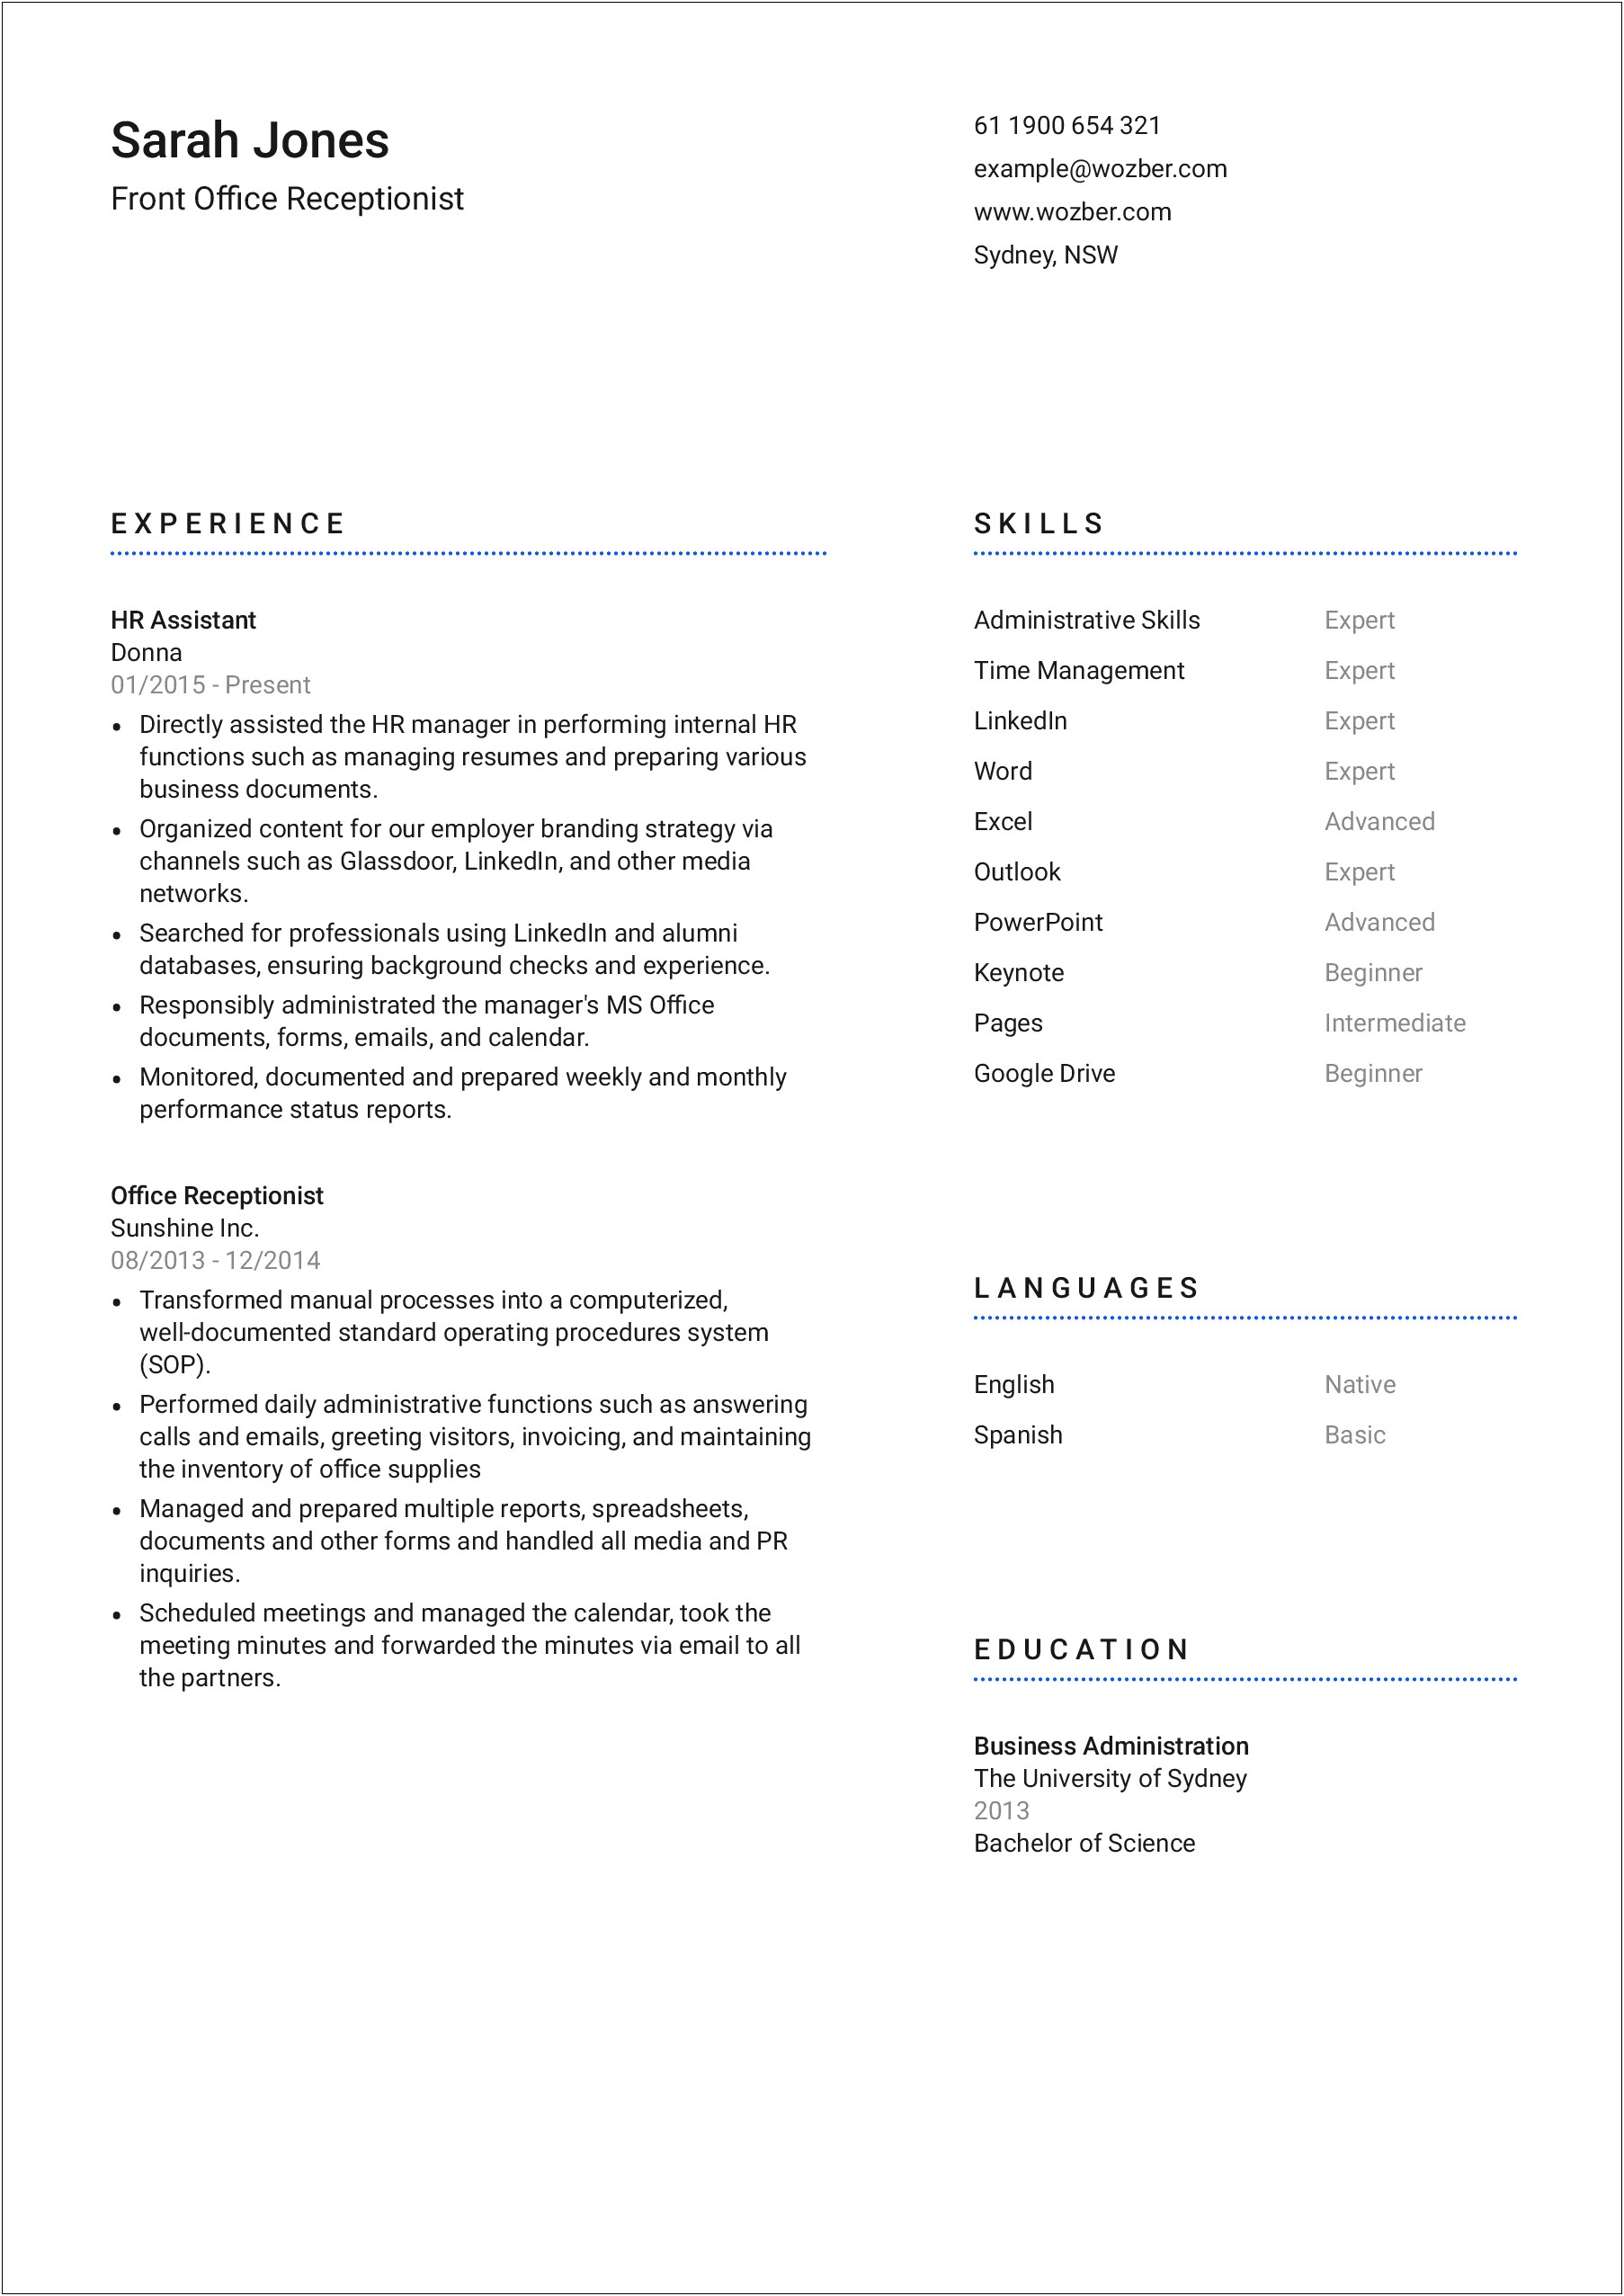 Examples Of The Three Types Of Resumes